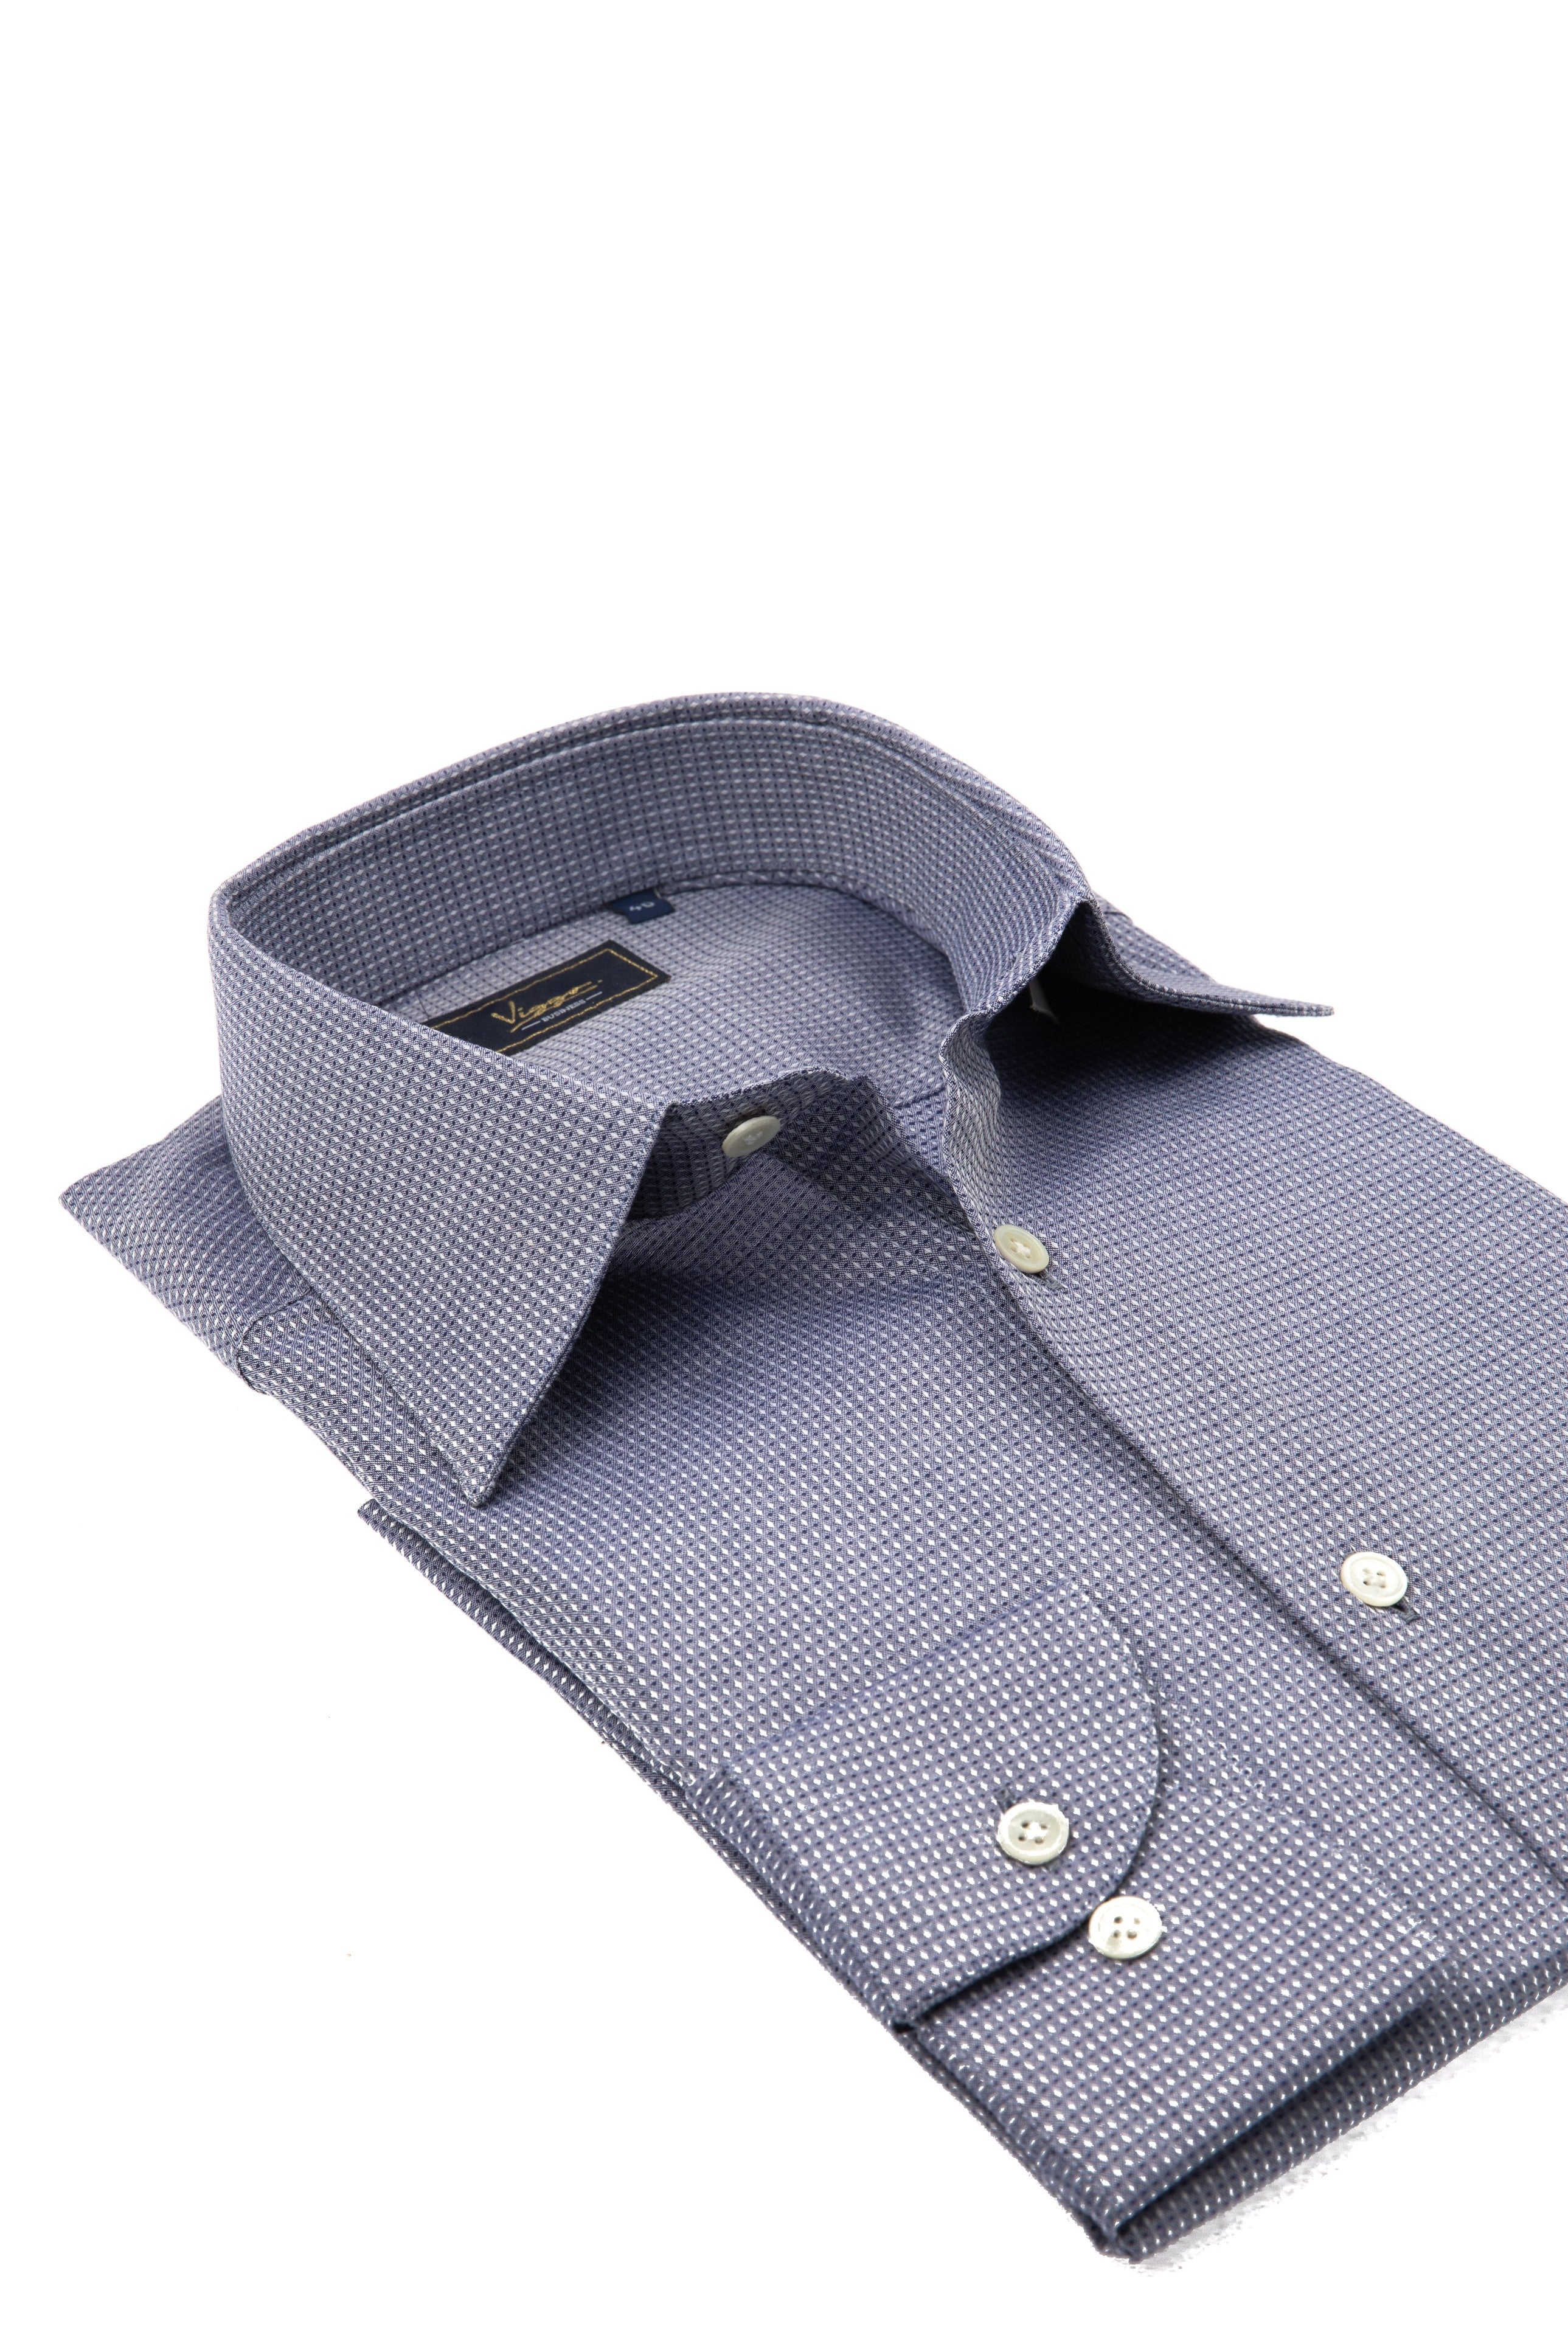 Gray Business Shirt With White And Navy Blue